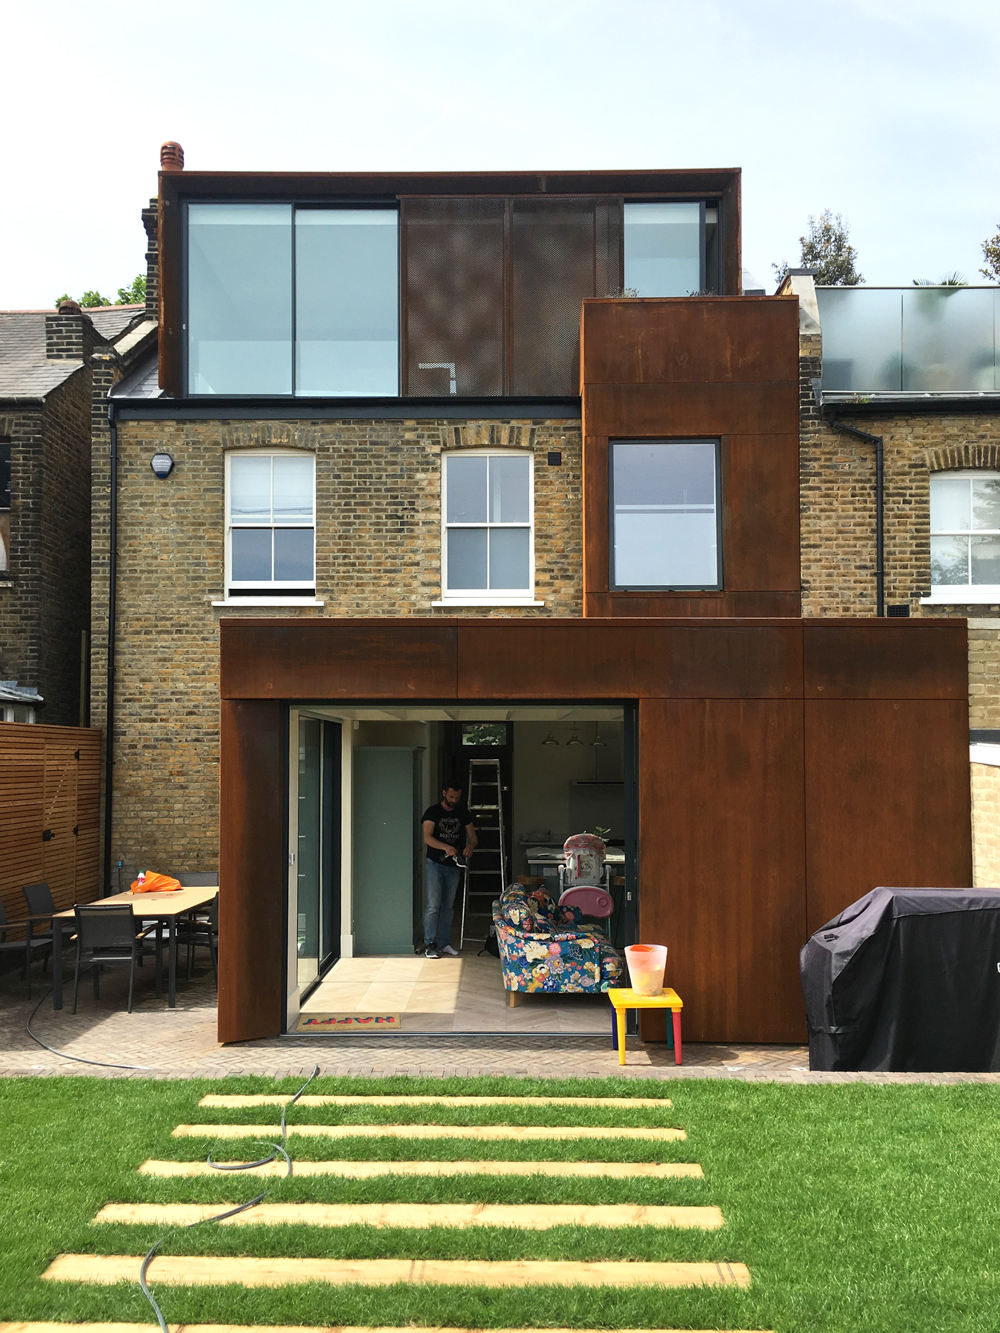 </p> <p>Find your ideal home design pro on designfor-me.com - get matched and see who's interested in your home project. Click image to see more inspiration from our design pros</p> <p>Design by Stephen, architect from Southwark, London</p> <p>#architecture #homedesign #modernhomes #homeinspiration #extensions #extensiondesign #extensioninspiration #extensionideas #houseextension #slidingdoors </p> <p>